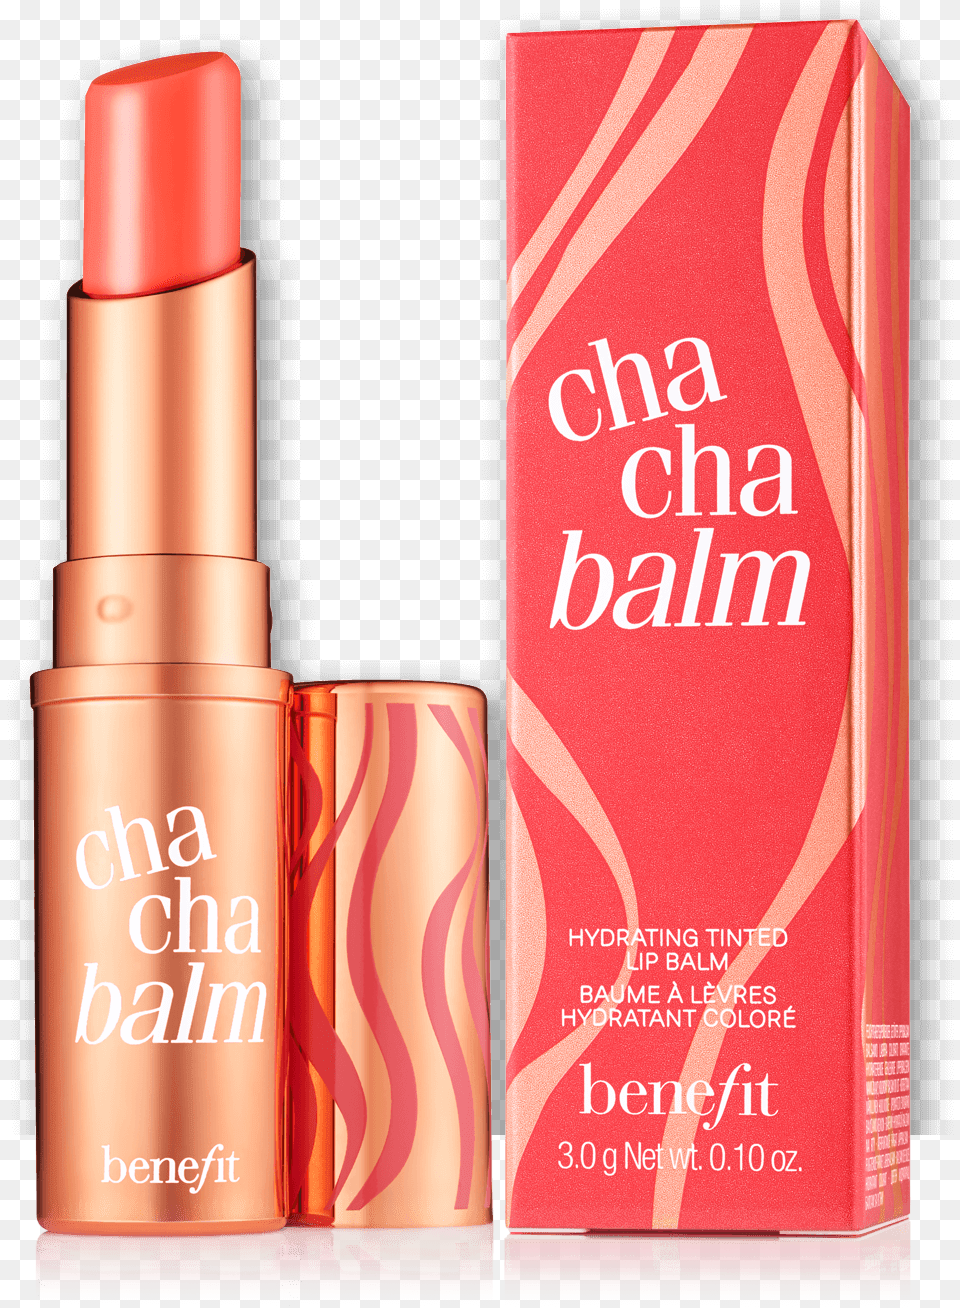 Chachabalm Coral Lip Balm Benefit Chachabalm Hydrating Tinted Lip Balm, Book, Cosmetics, Lipstick, Publication Png Image